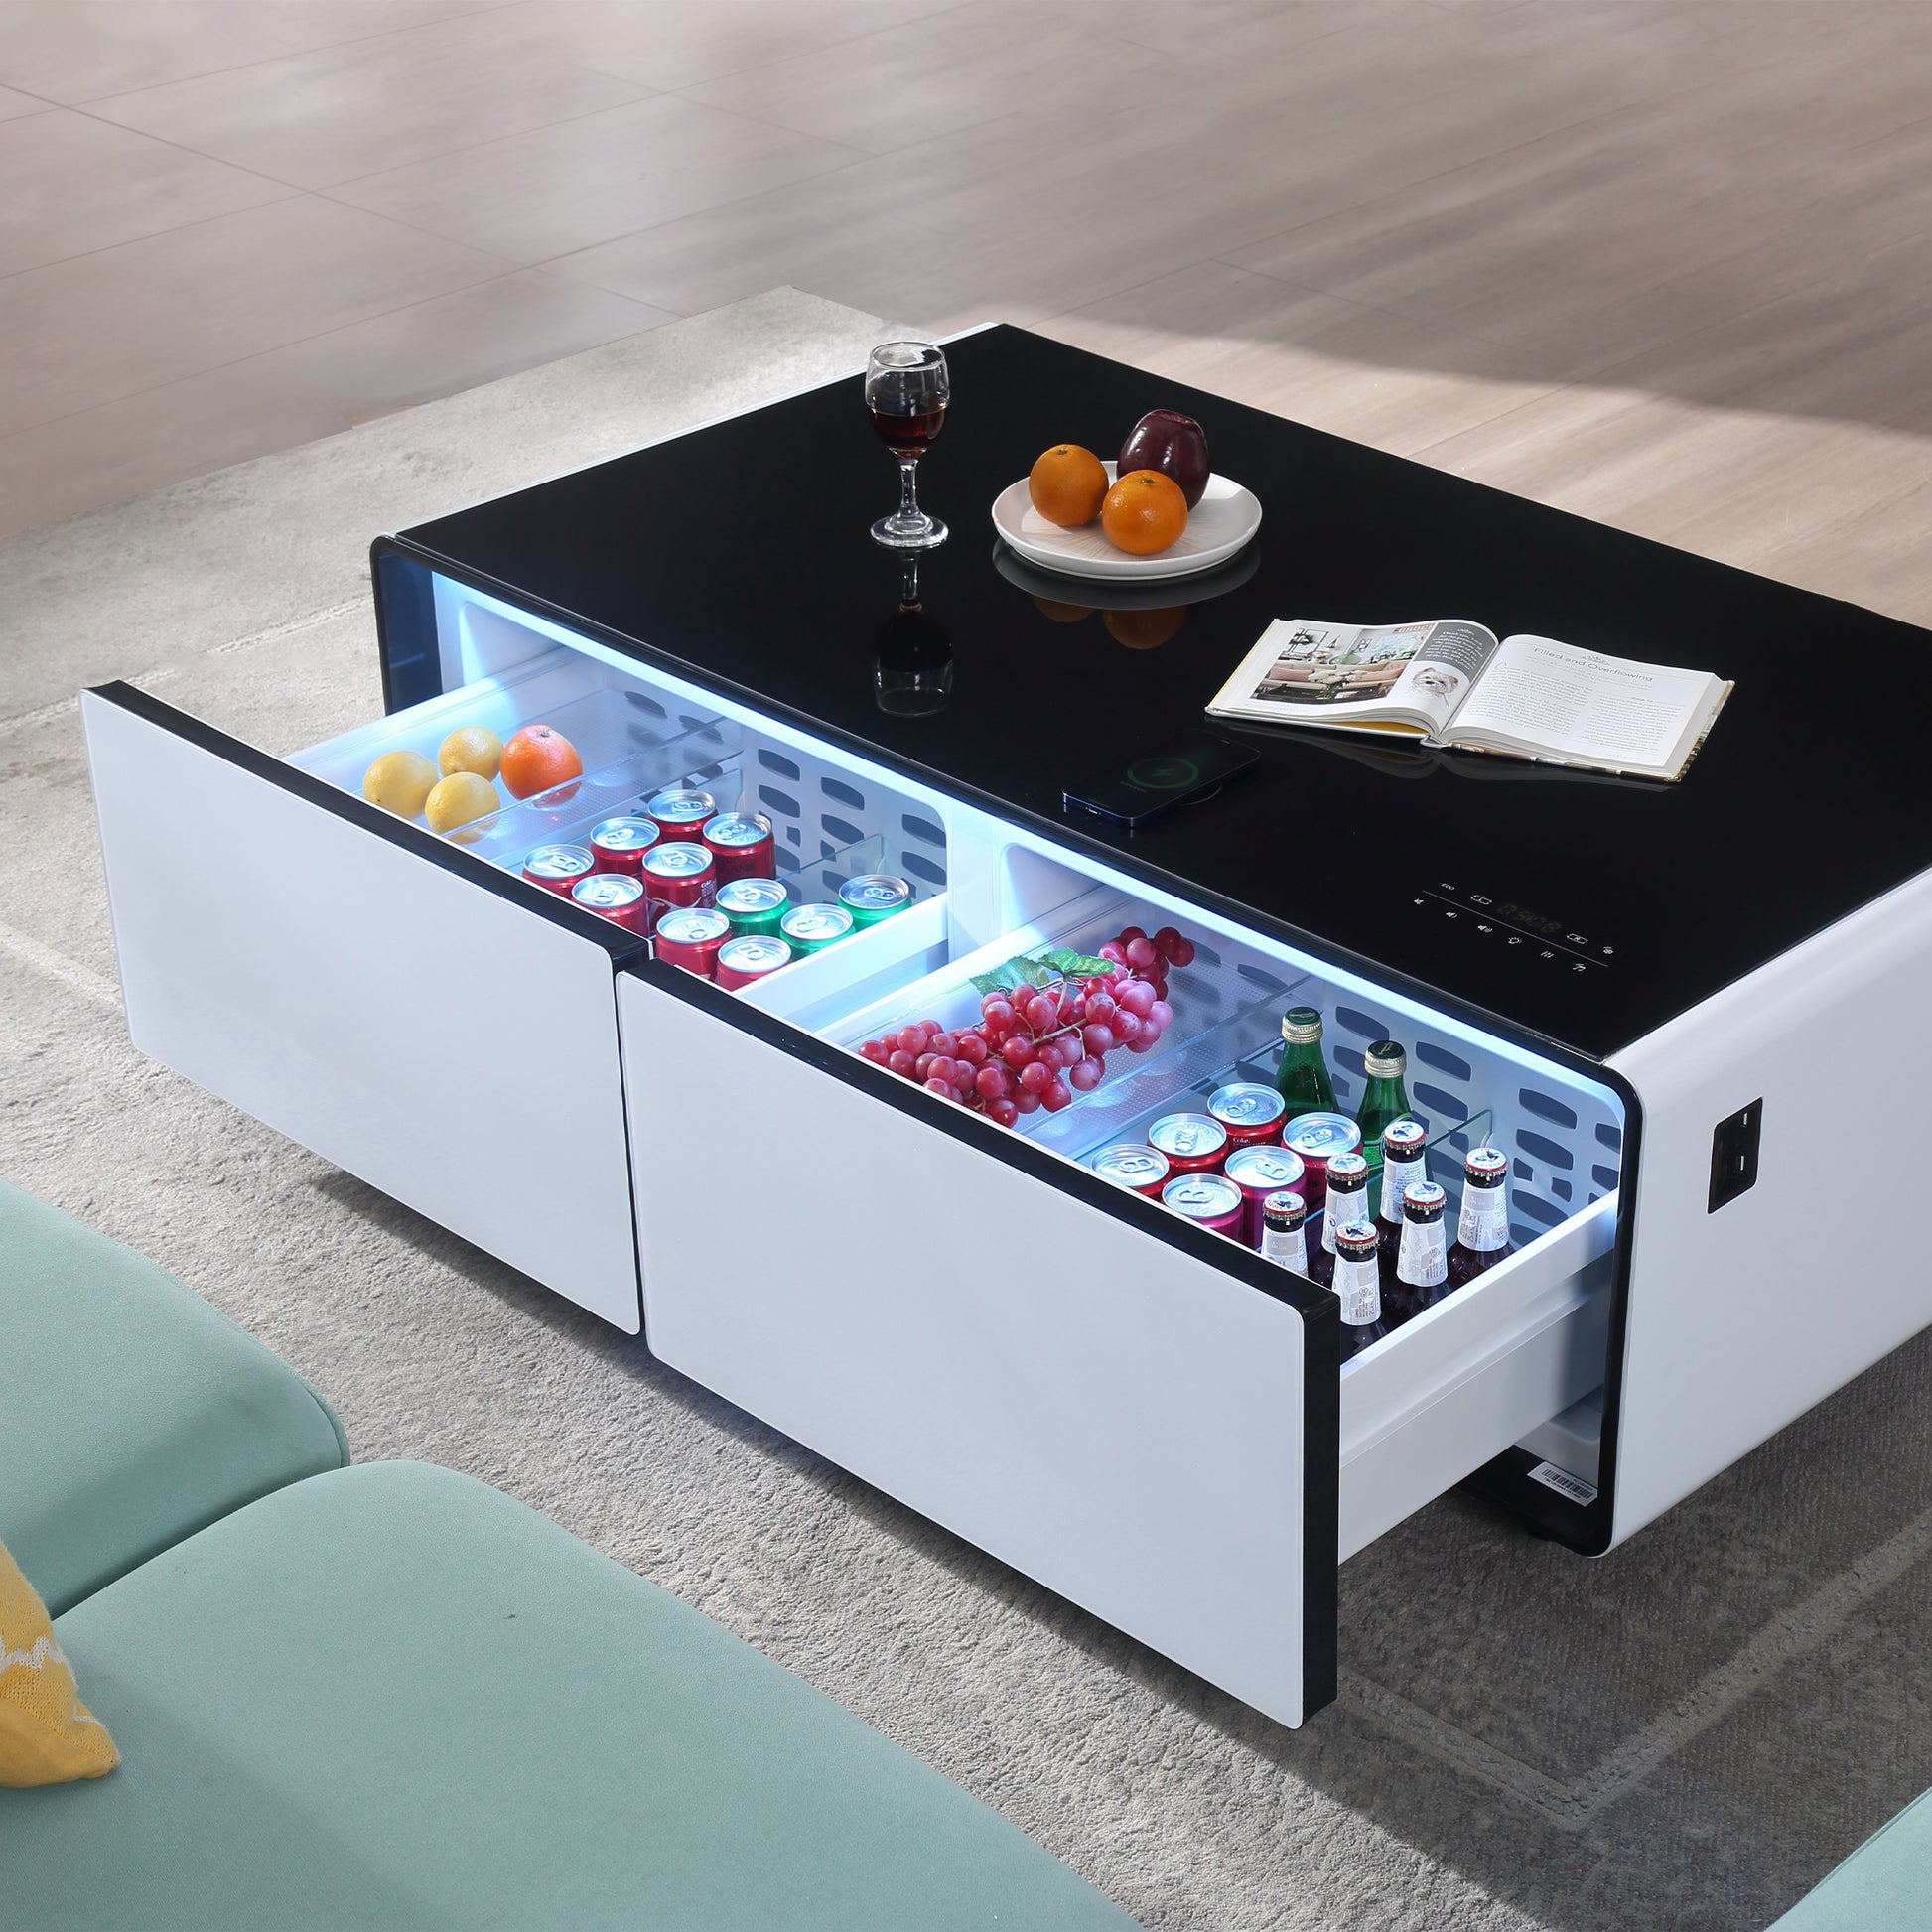 Modern Smart Coffee Table with Built in Fridge white+black-built-in outlets or usb-primary